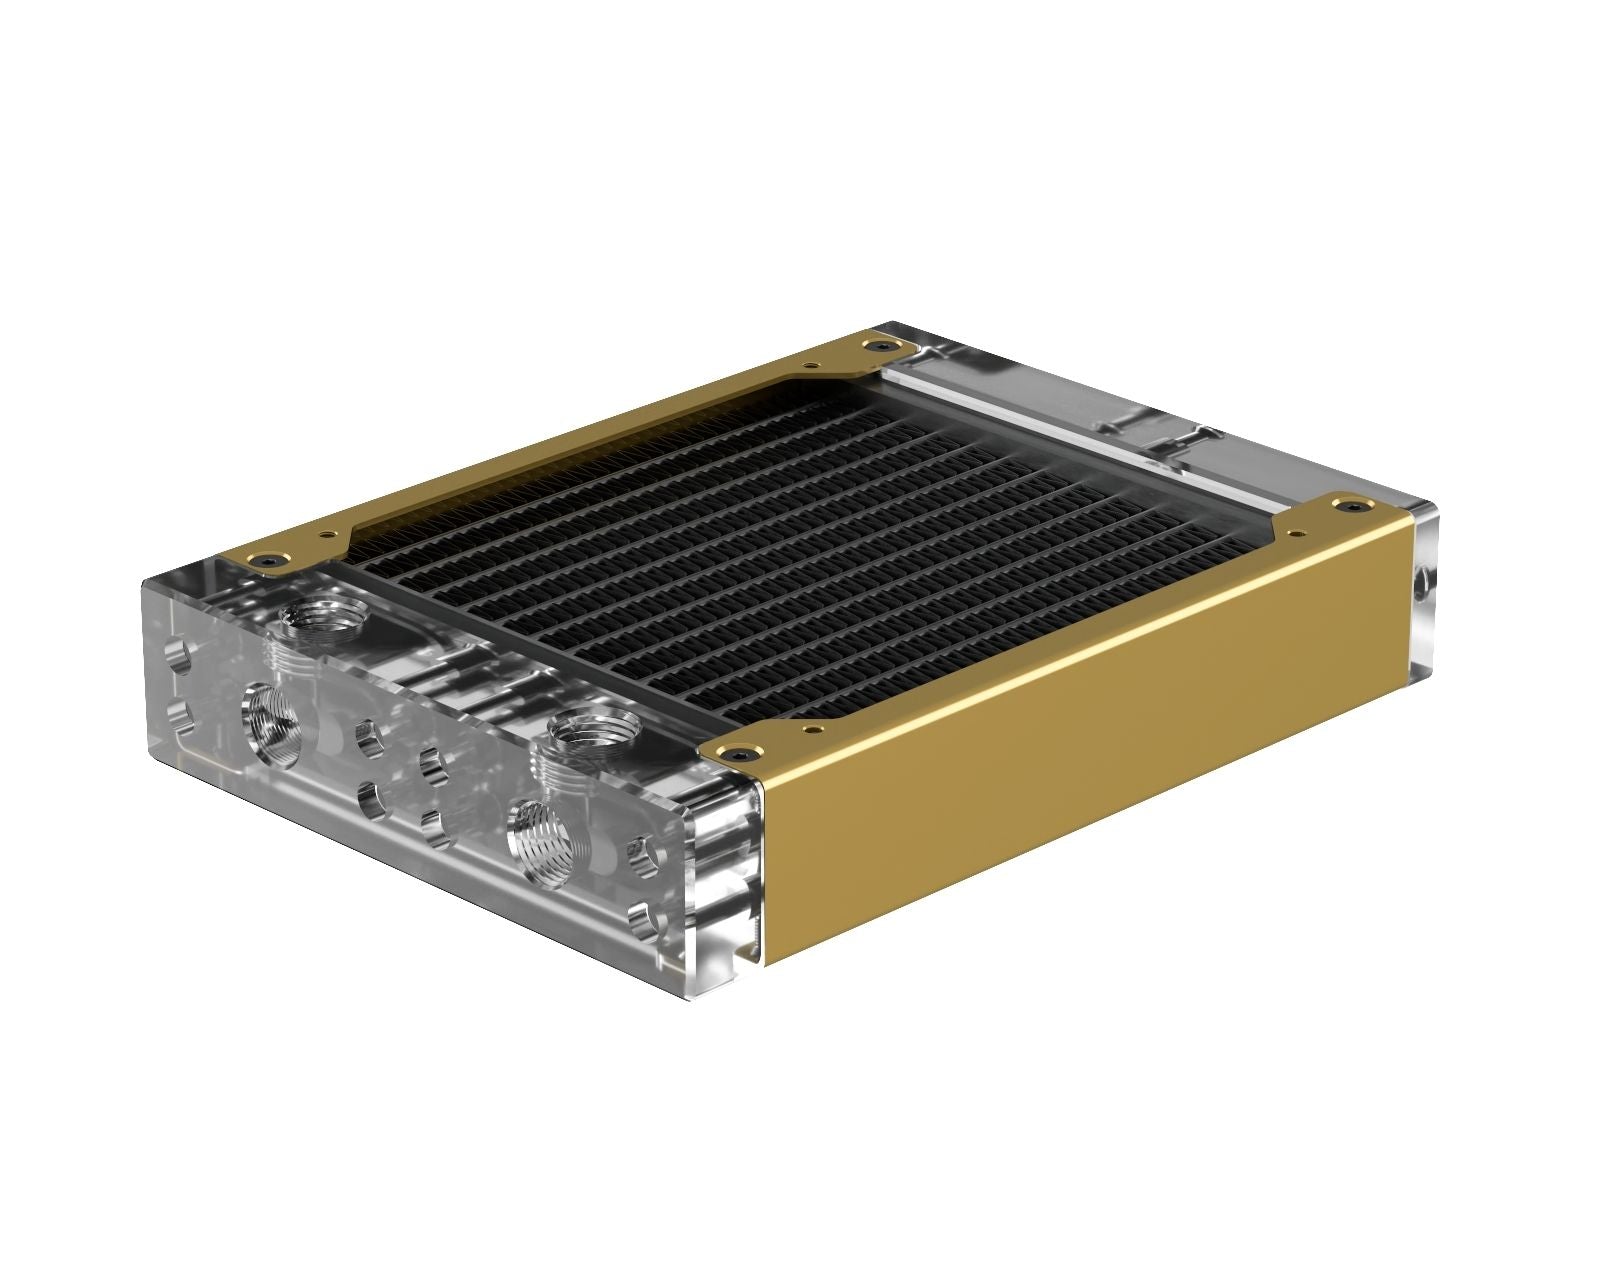 PrimoChill 120SL (30mm) EXIMO Modular Radiator, Clear Acrylic, 1x120mm, Single Fan (R-SL-A12) Available in 20+ Colors, Assembled in USA and Custom Watercooling Loop Ready - Candy Gold